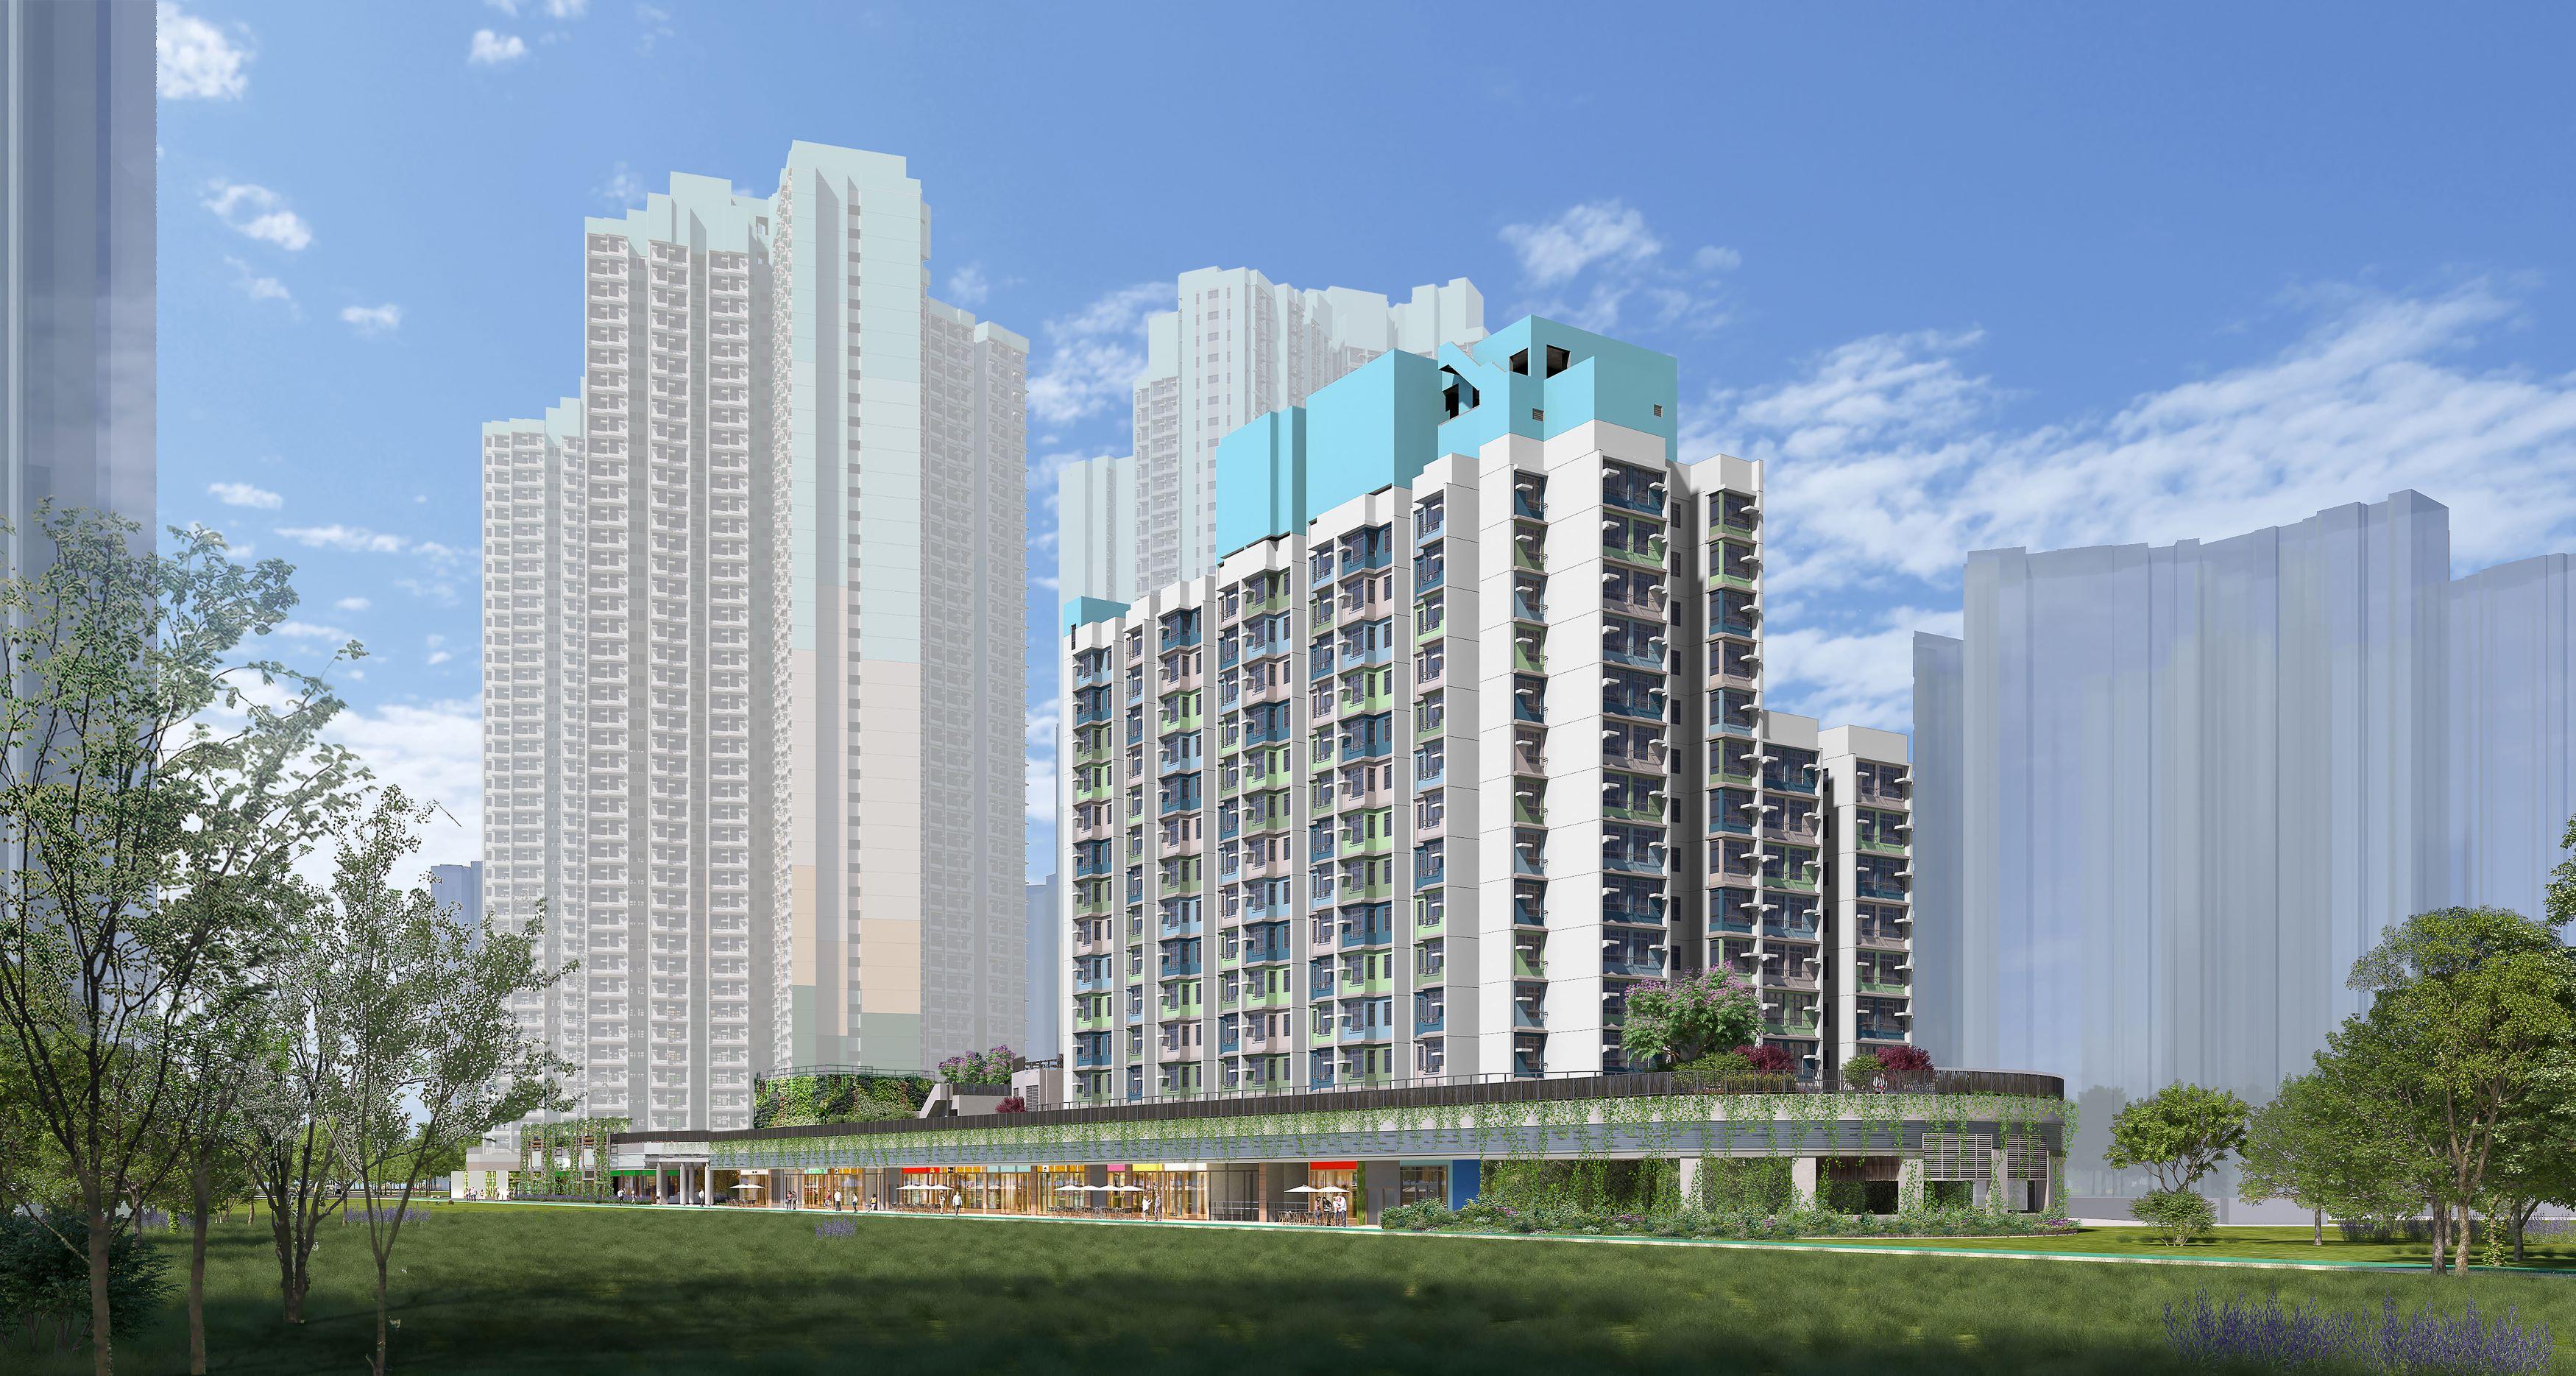 The Hong Kong Housing Authority arranged a media visit to the Modular Integrated Construction (MiC) mock-up for the public housing development at Tung Chung Area 99 (TC99) today (March 31). Photo shows the artist's impression of a 12-storey domestic block, the MiC project of the public housing development at TC99 after completion.



